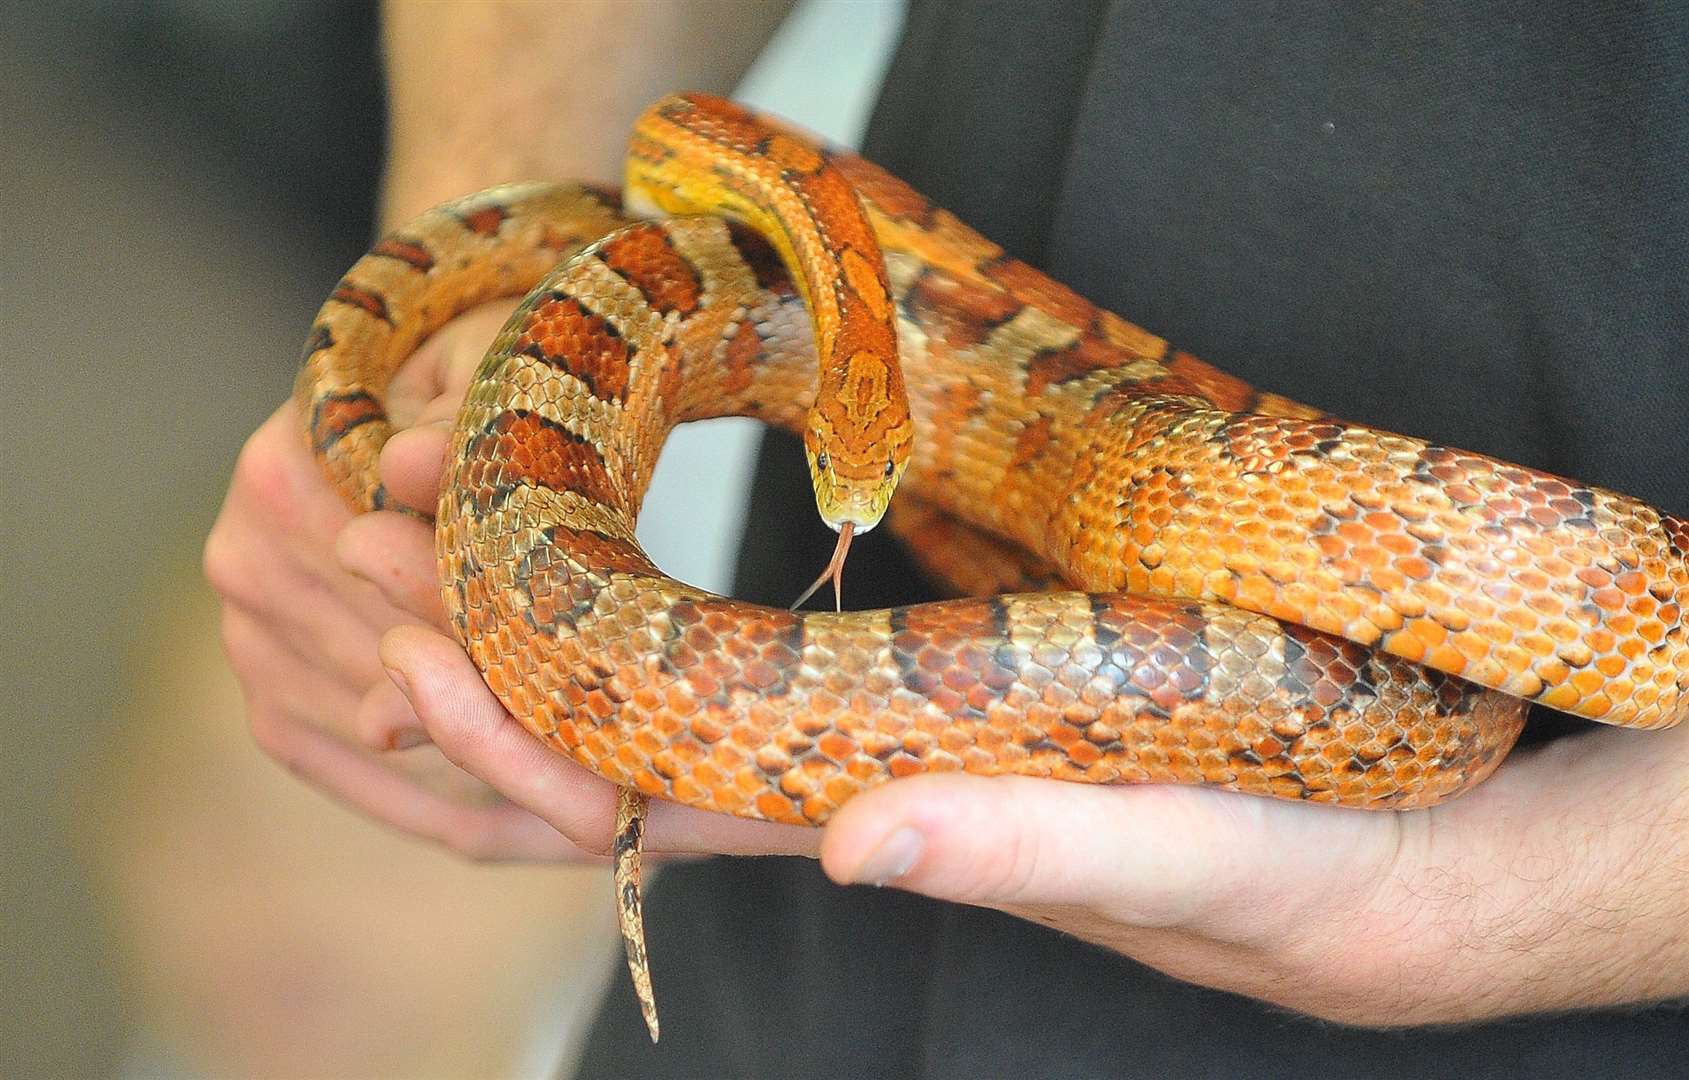 Cornsnakes usually only bite if they are frightened